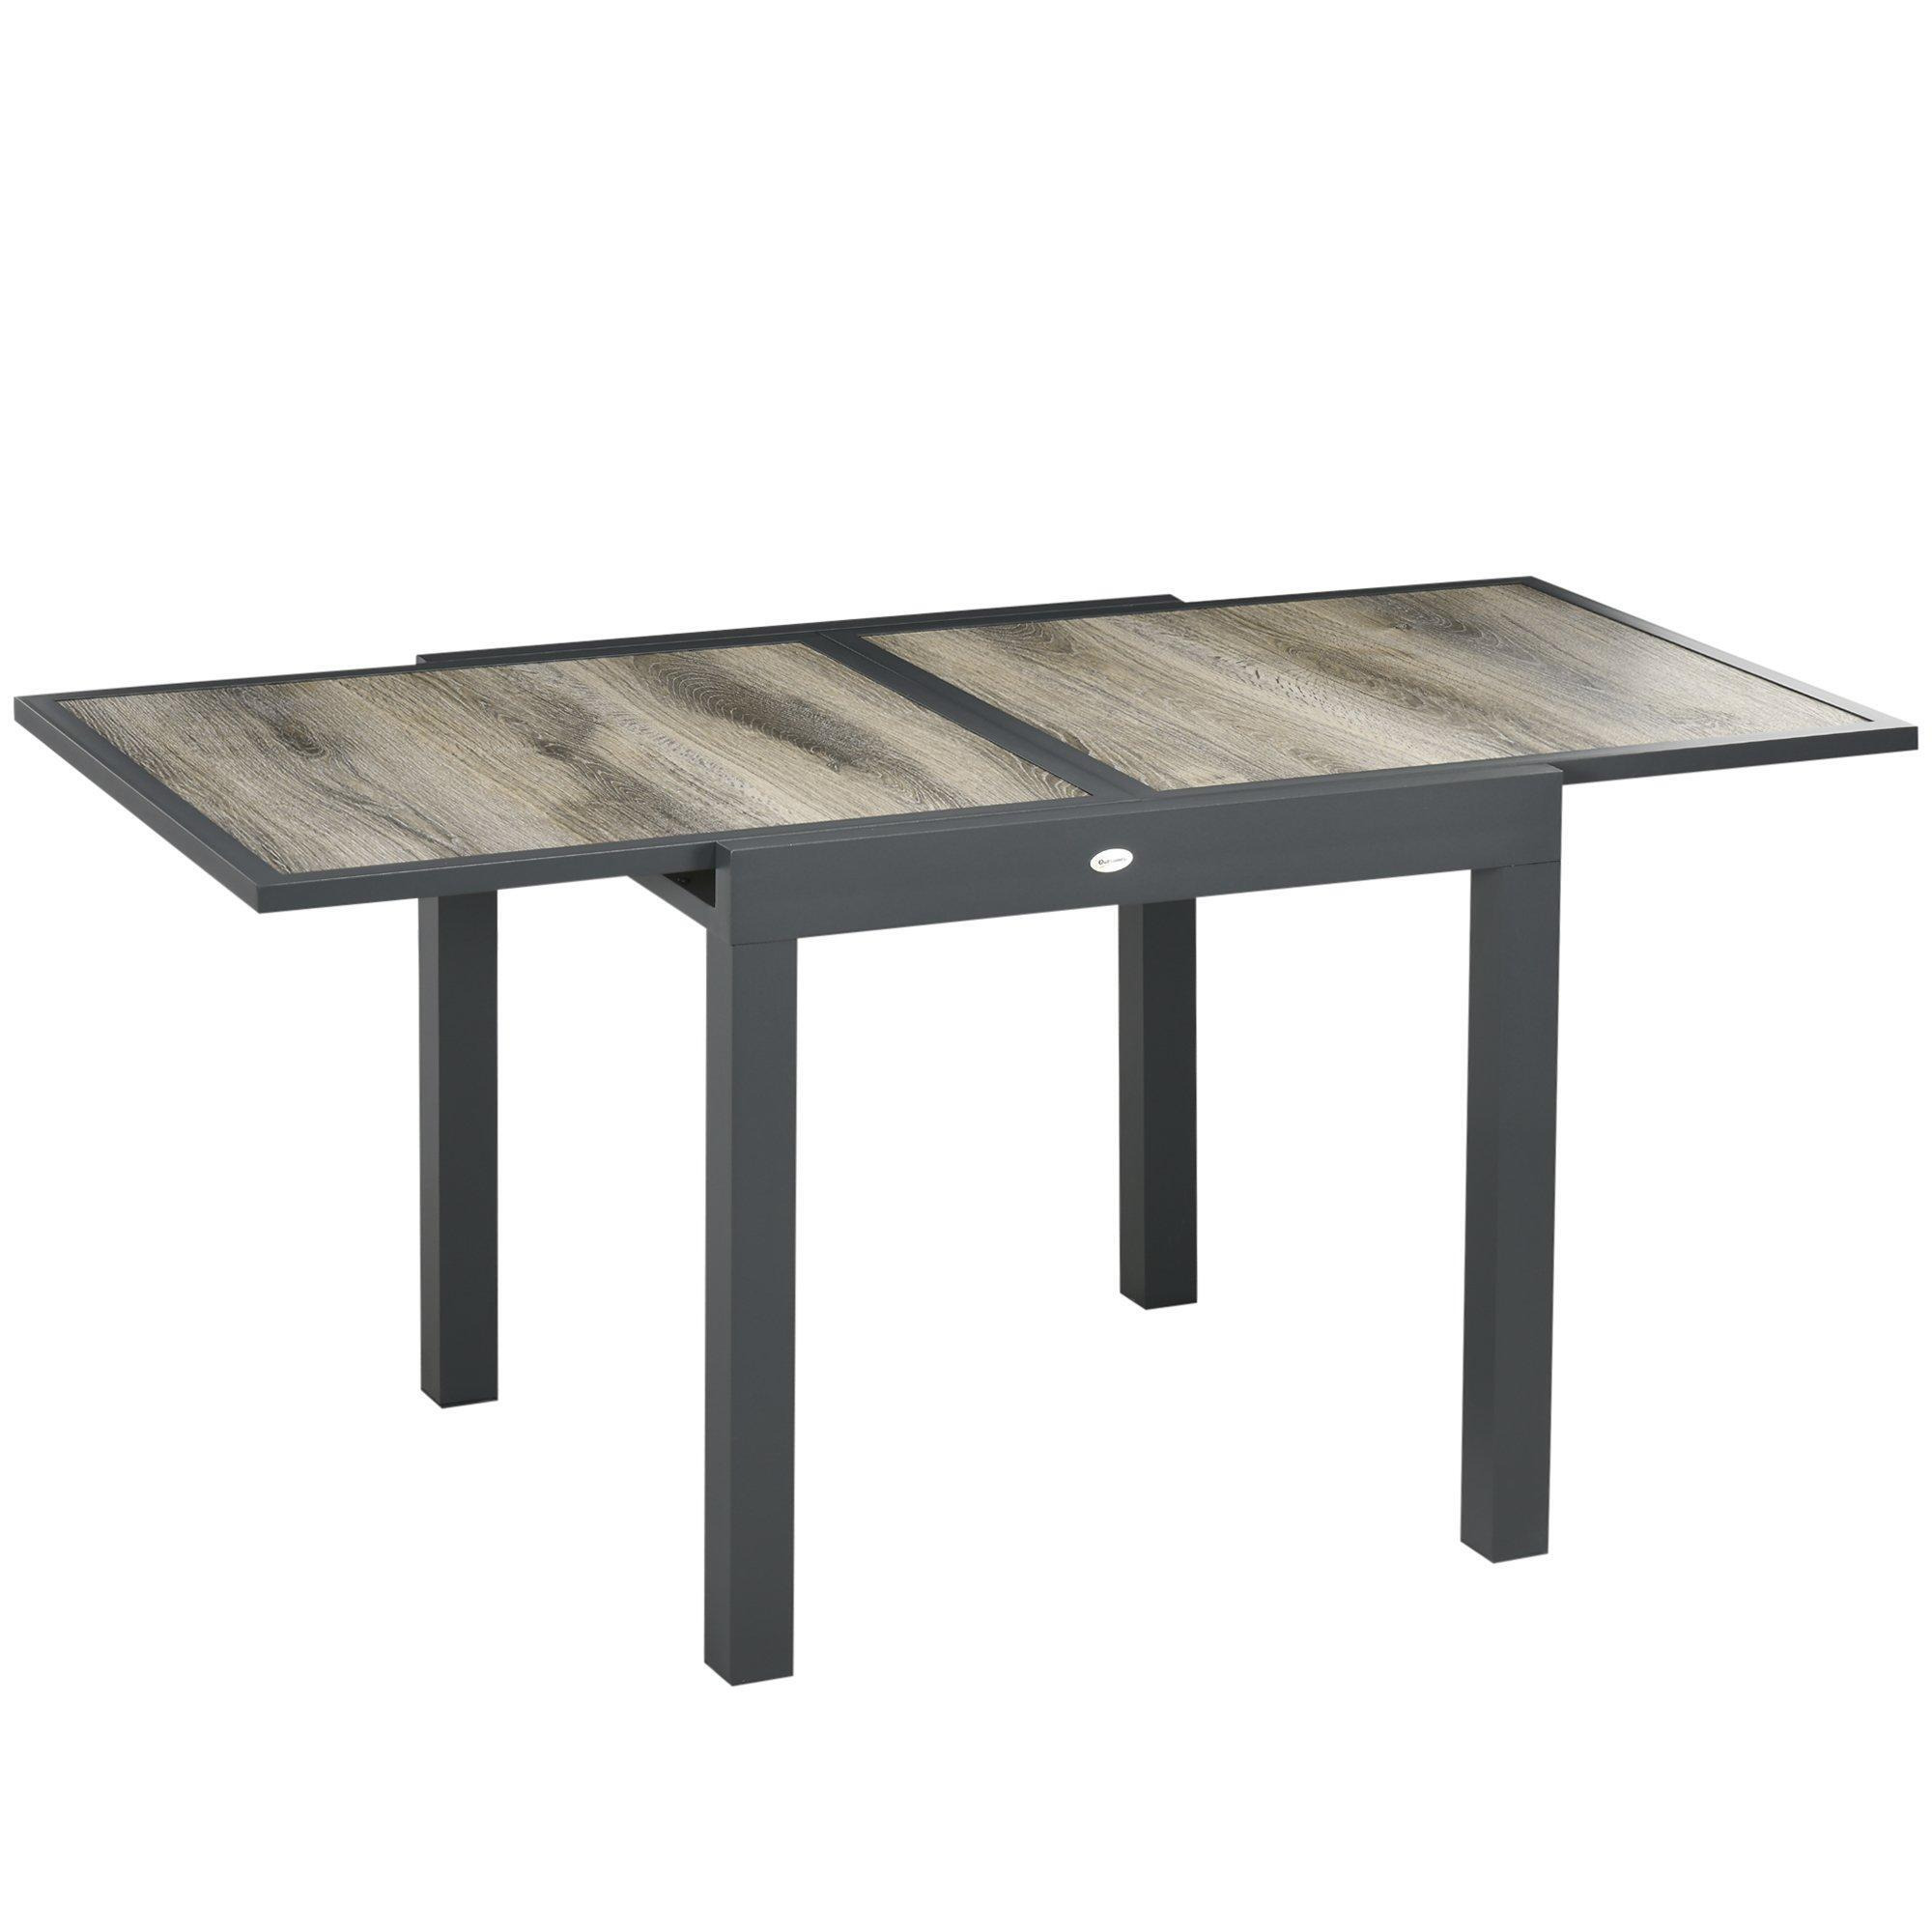 Extendable Outdoor Dining Table Aluminium Rectangle Patio Table - image 1